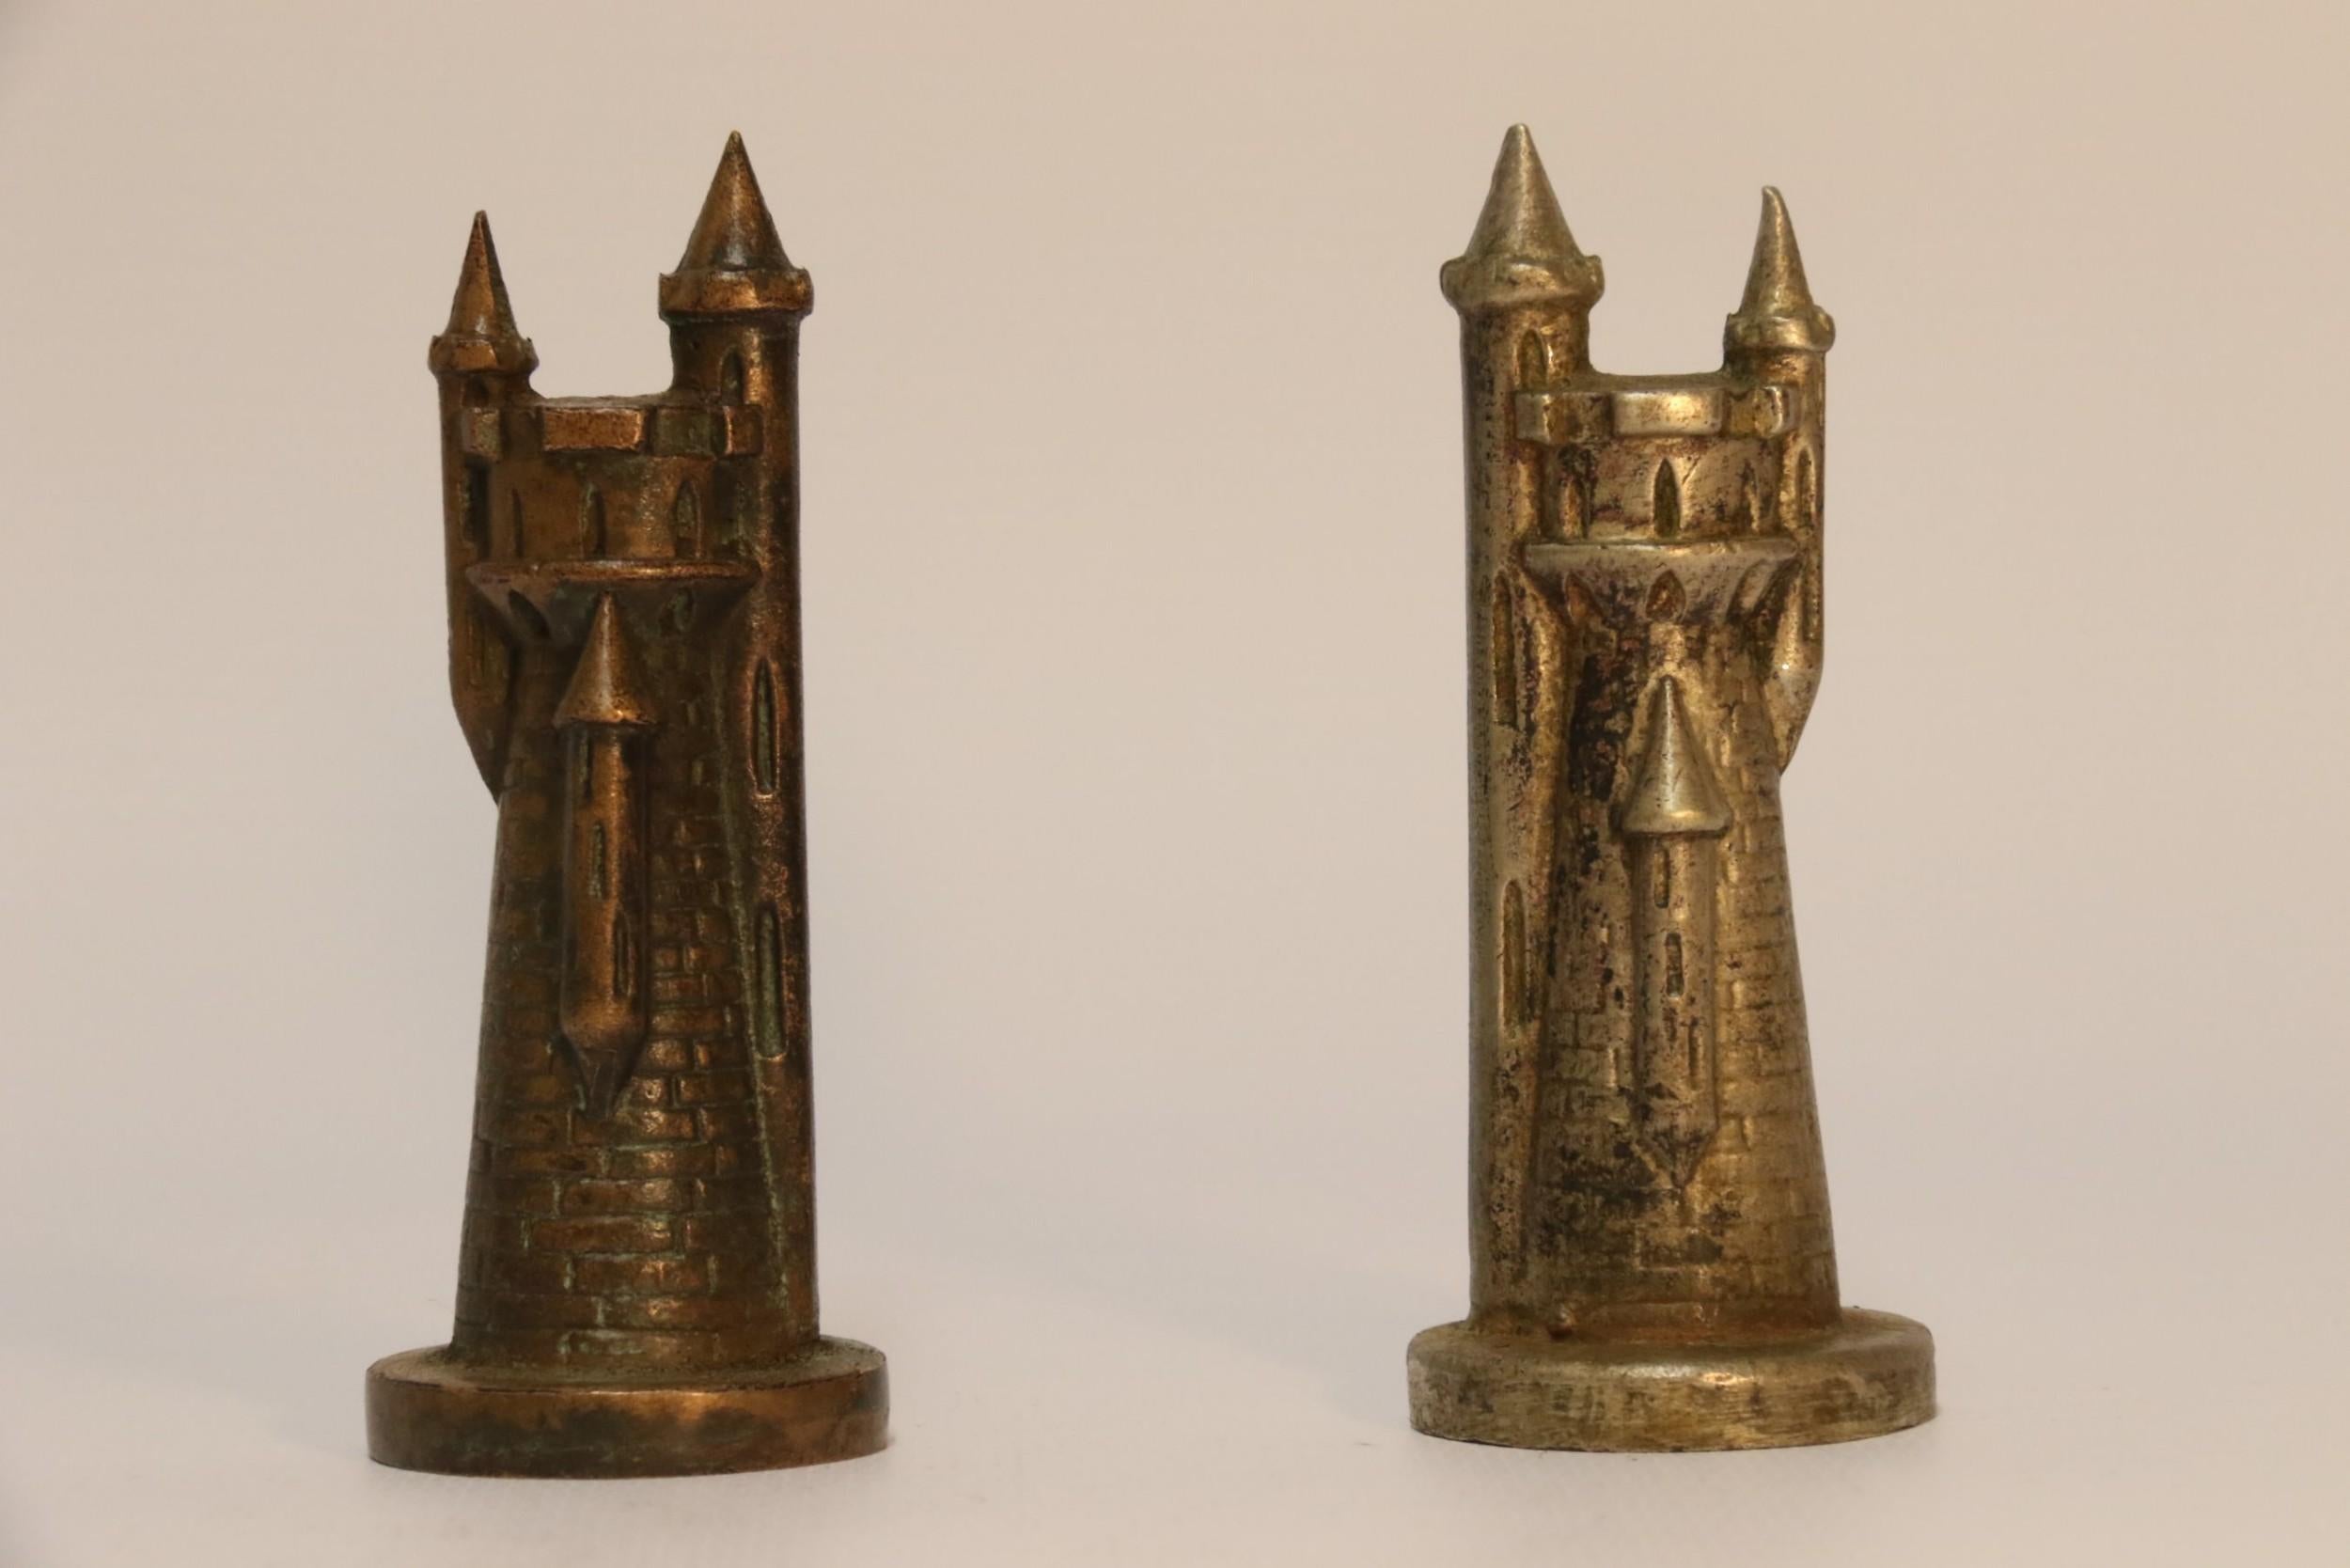 English Novelty Heavy Cast Nickel and Bronze Chess Set Modeled on Medieval Figures For Sale